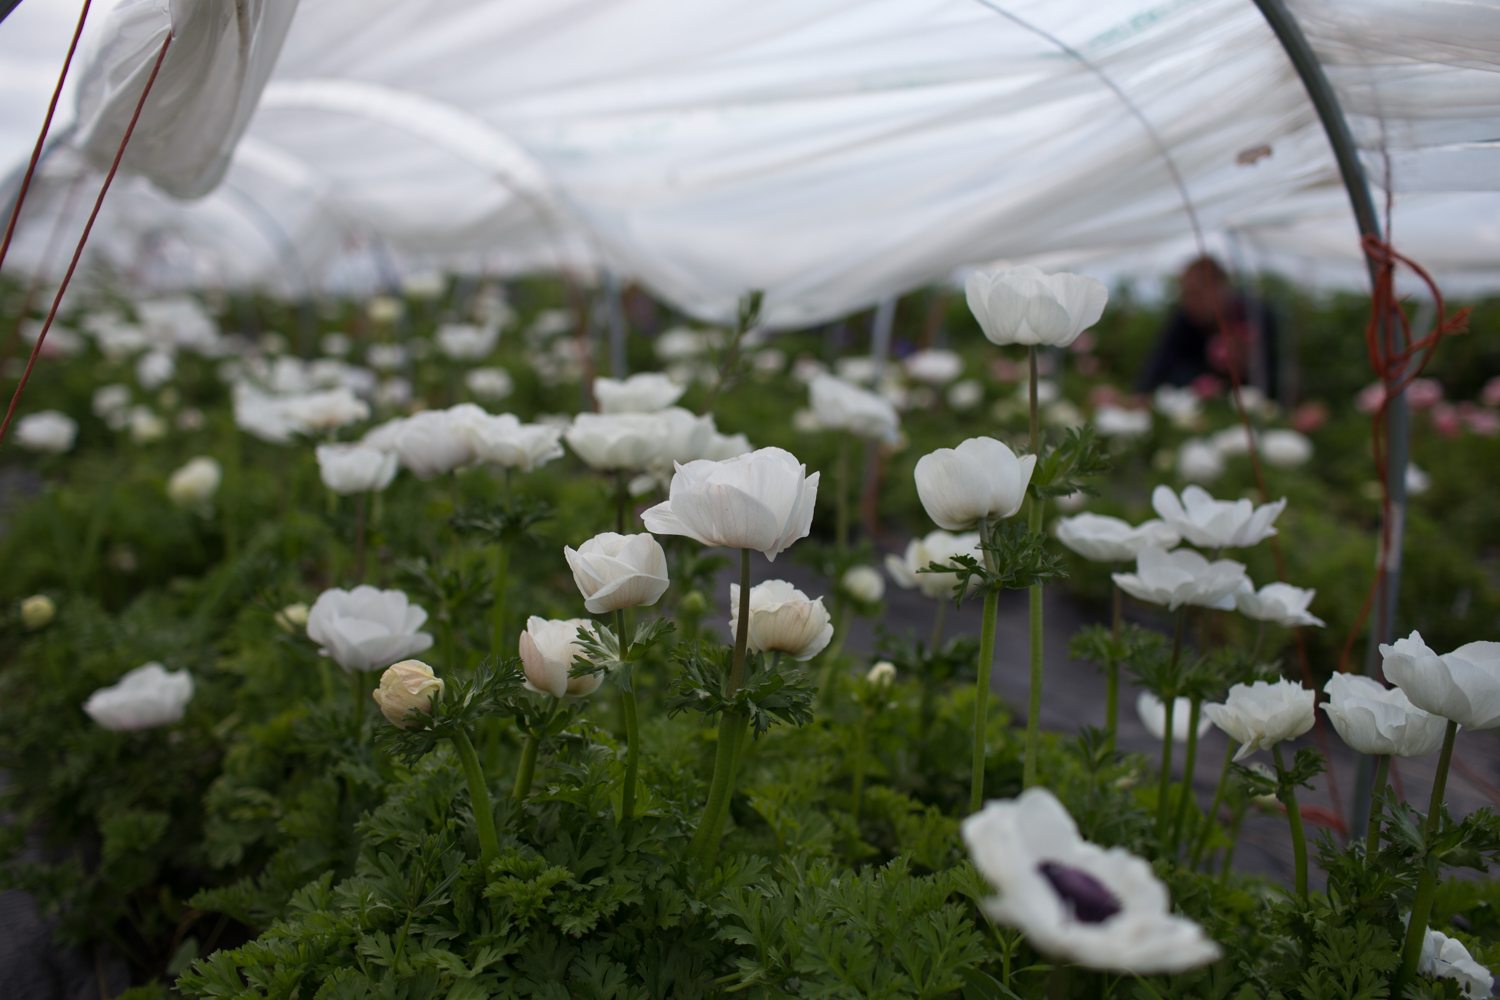 Anemones growing in a greenhouse